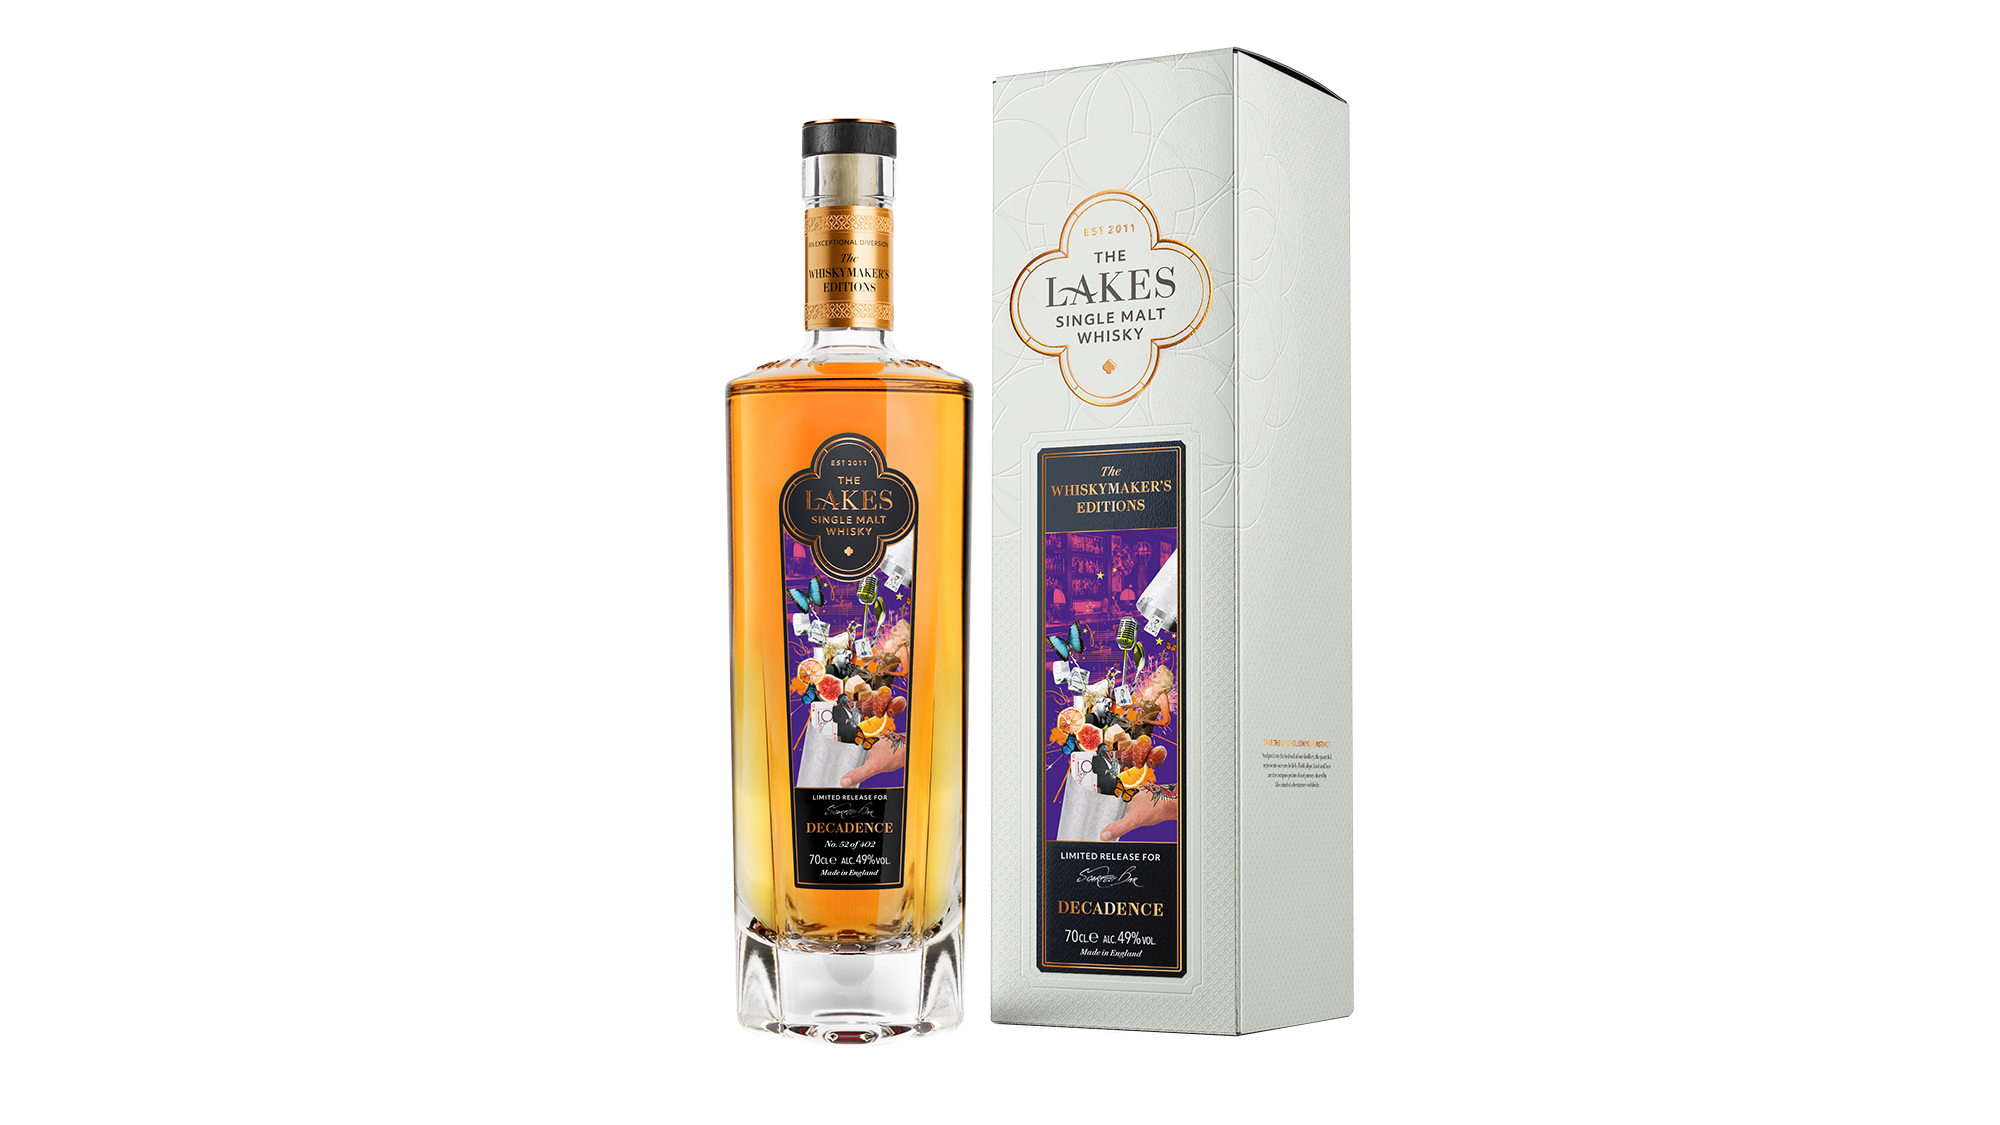 Scarfes Bar Teams Up With The Lakes Distillery To Launch ‘Decadence’ Single Malt